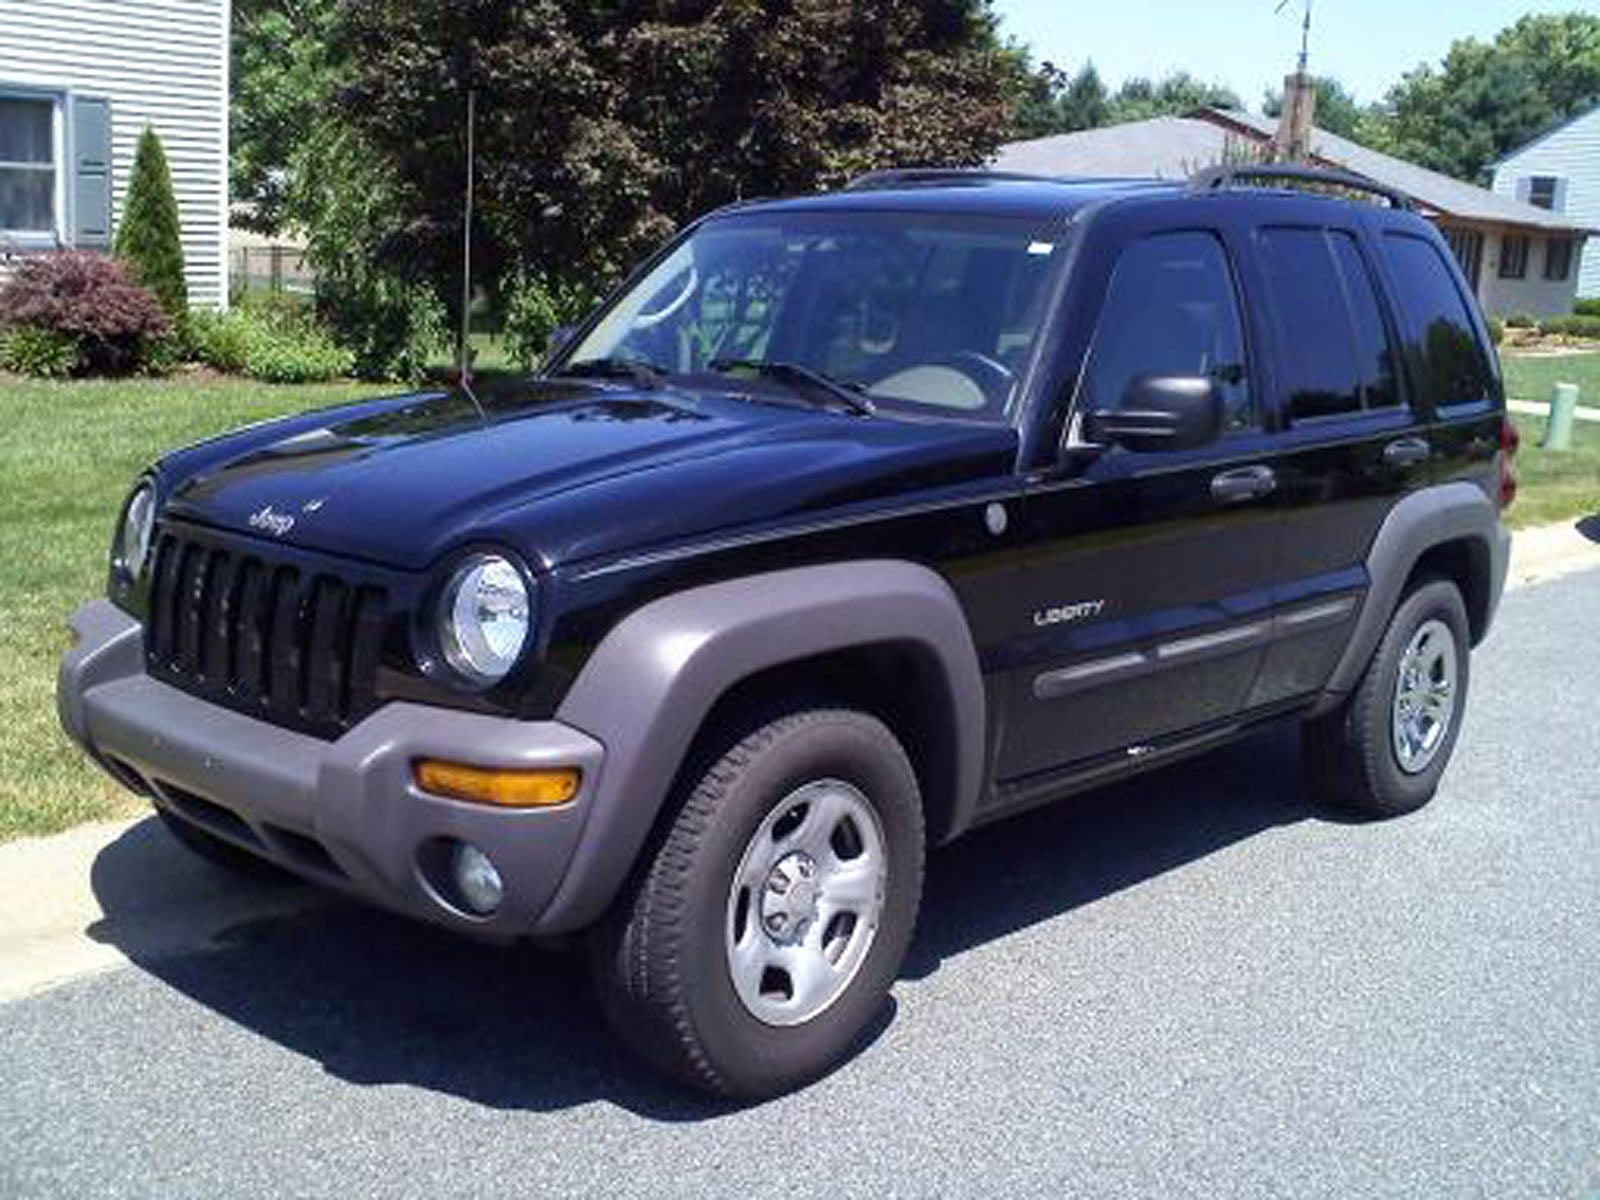 Ratings for jeep liberty 2004 #1